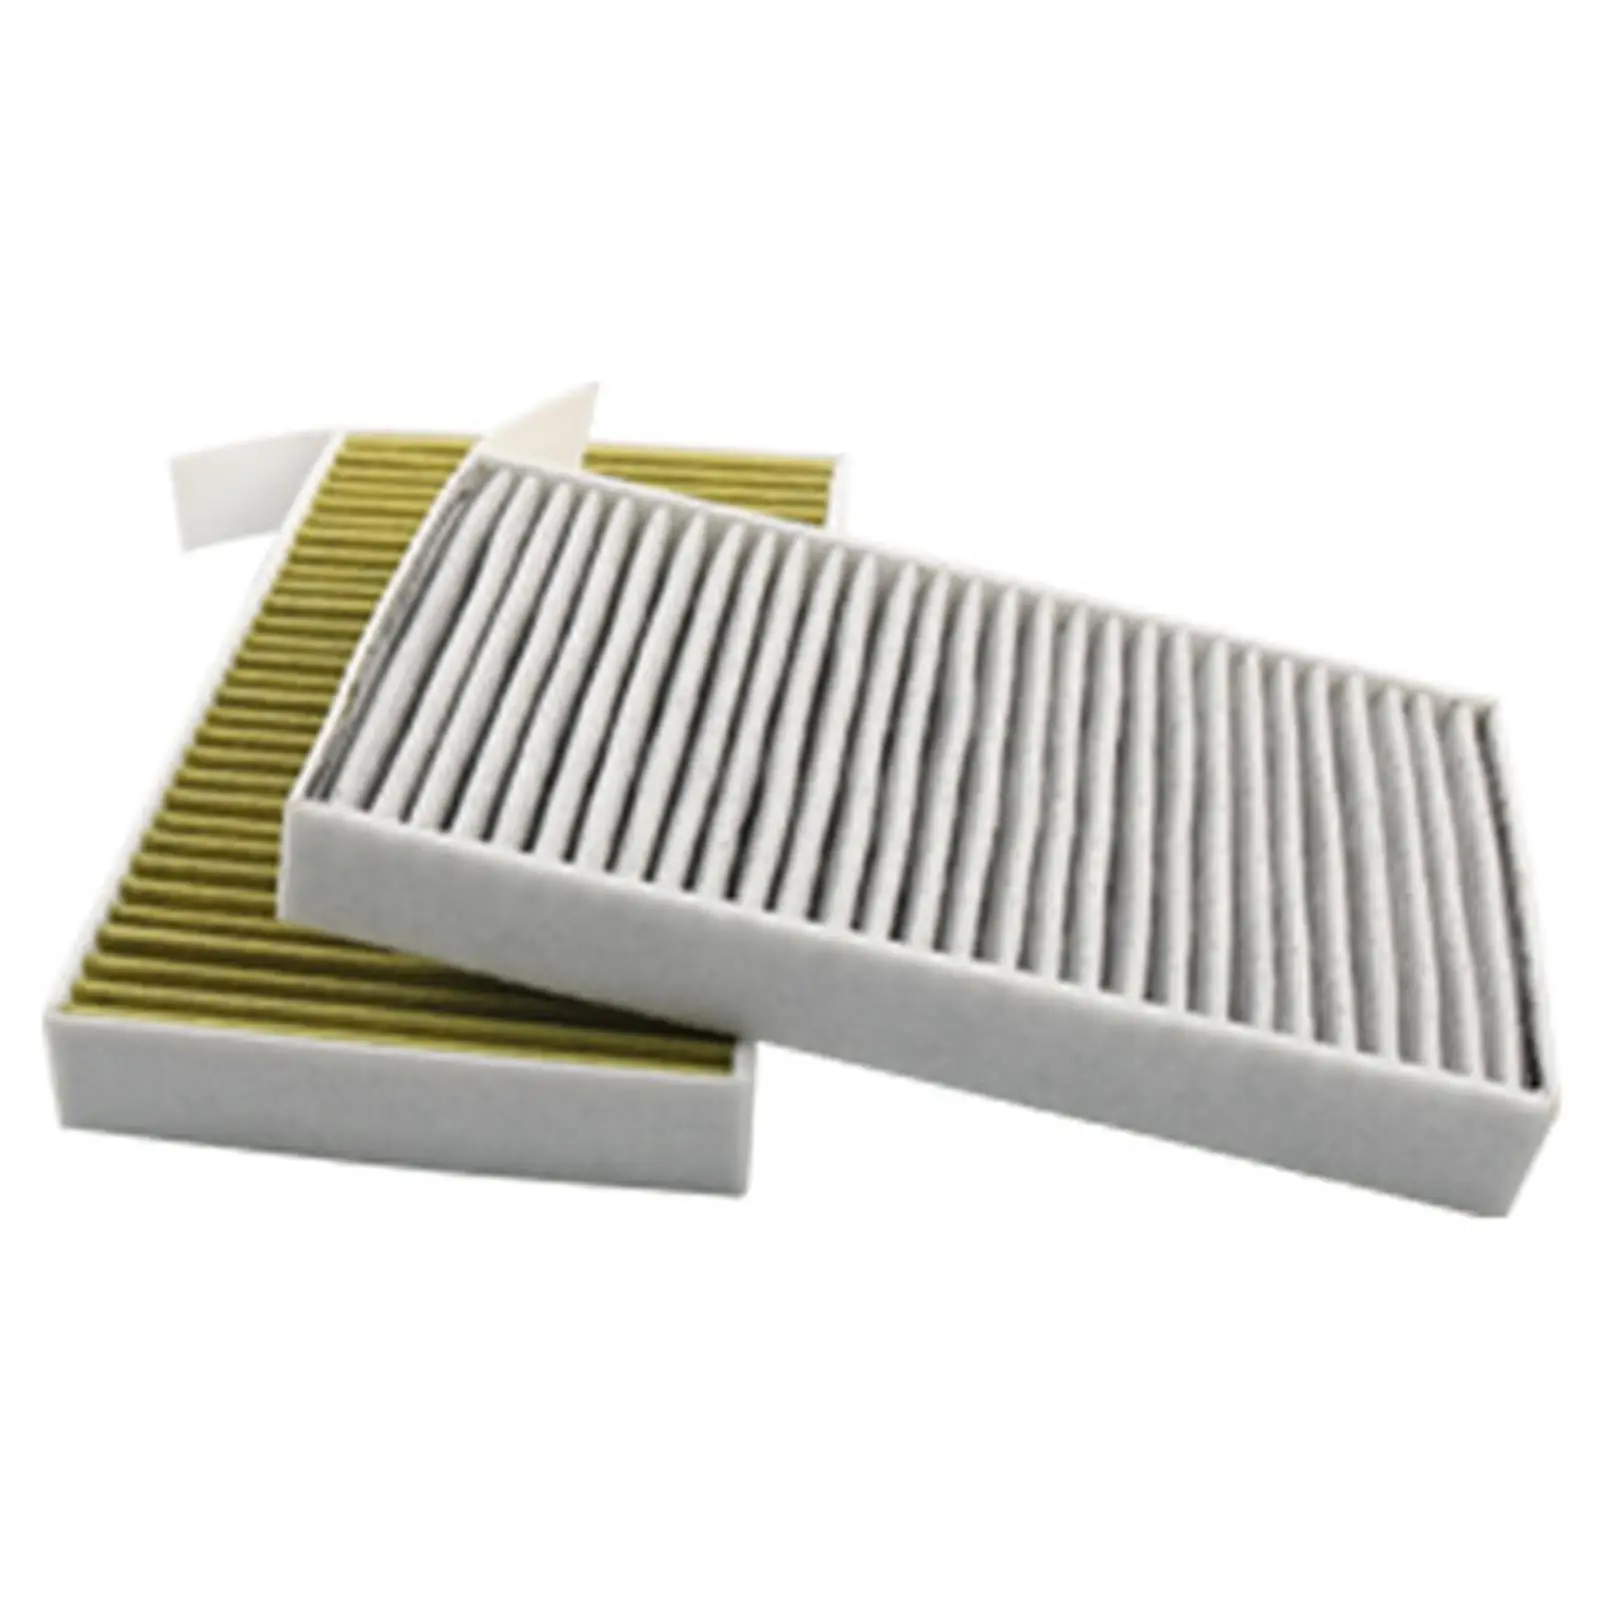 2x Carbon Air Filter Auto Parts Replacement Car Supplies Cabin Filter Fit for Tesla Model 3 2017-2021 1107681-00-A 110768100A